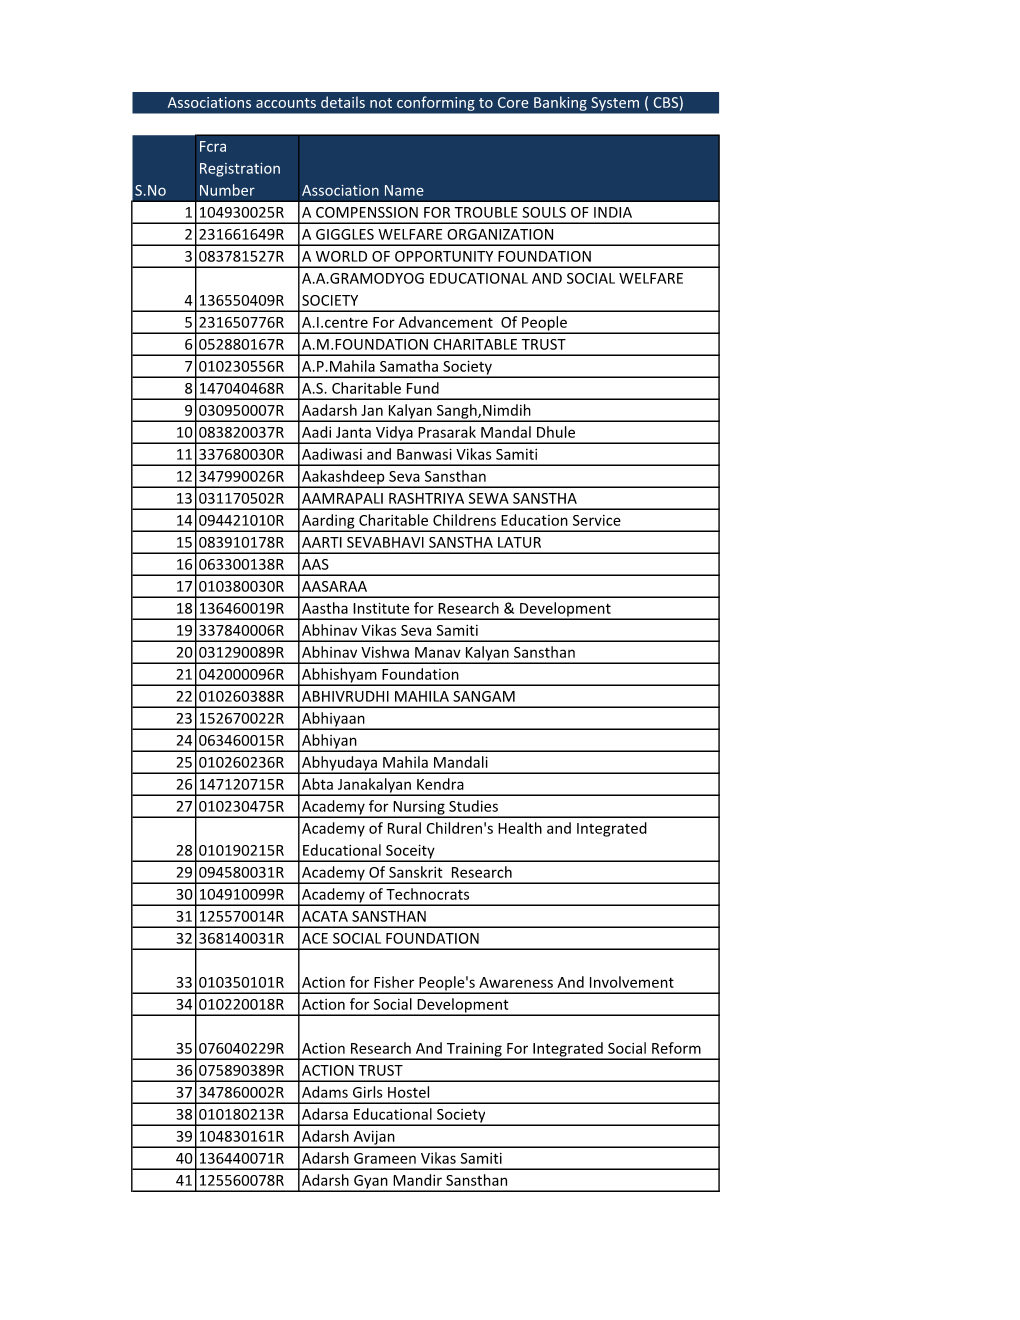 List of Associations Whose Bank Accounts Are Not Available As Per Core Banking Format